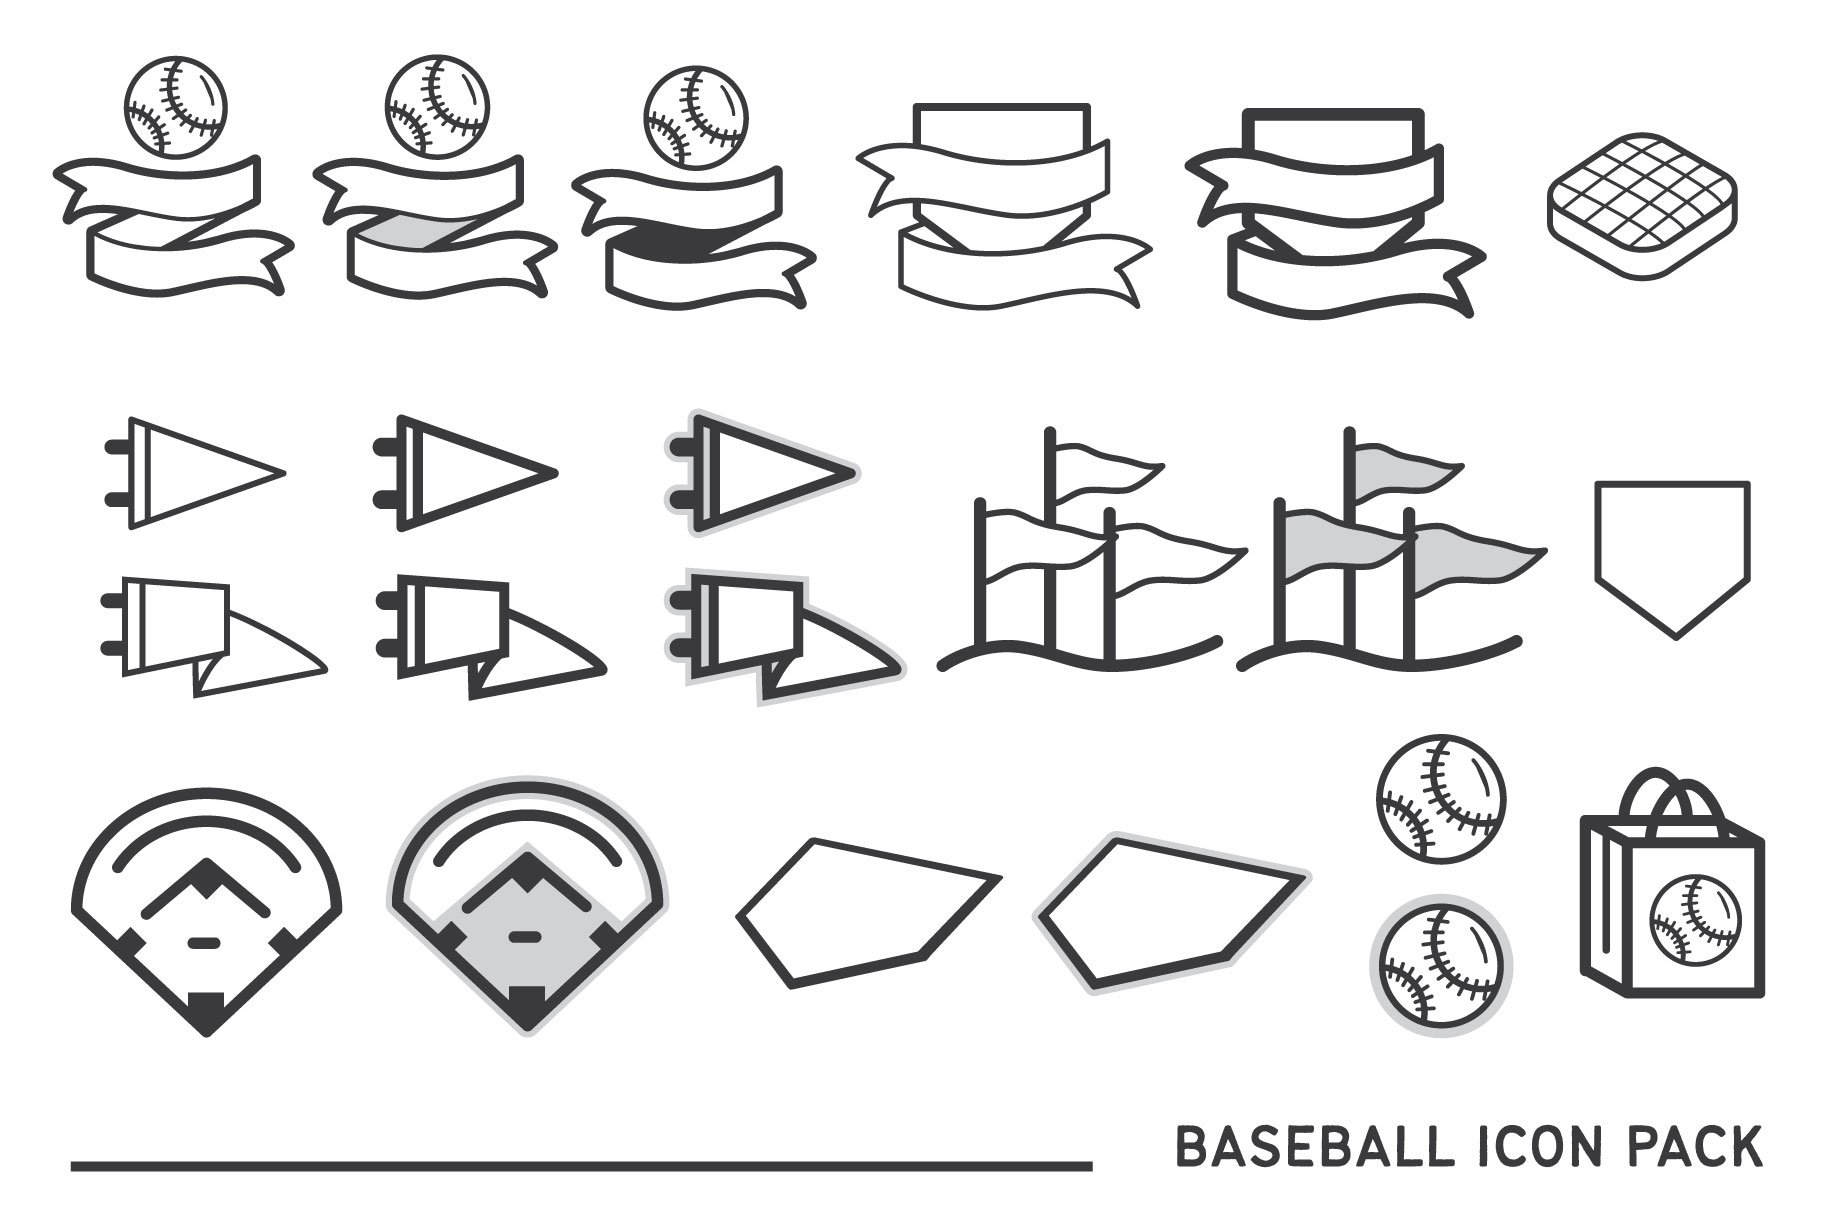 Some elements for baseball icons.